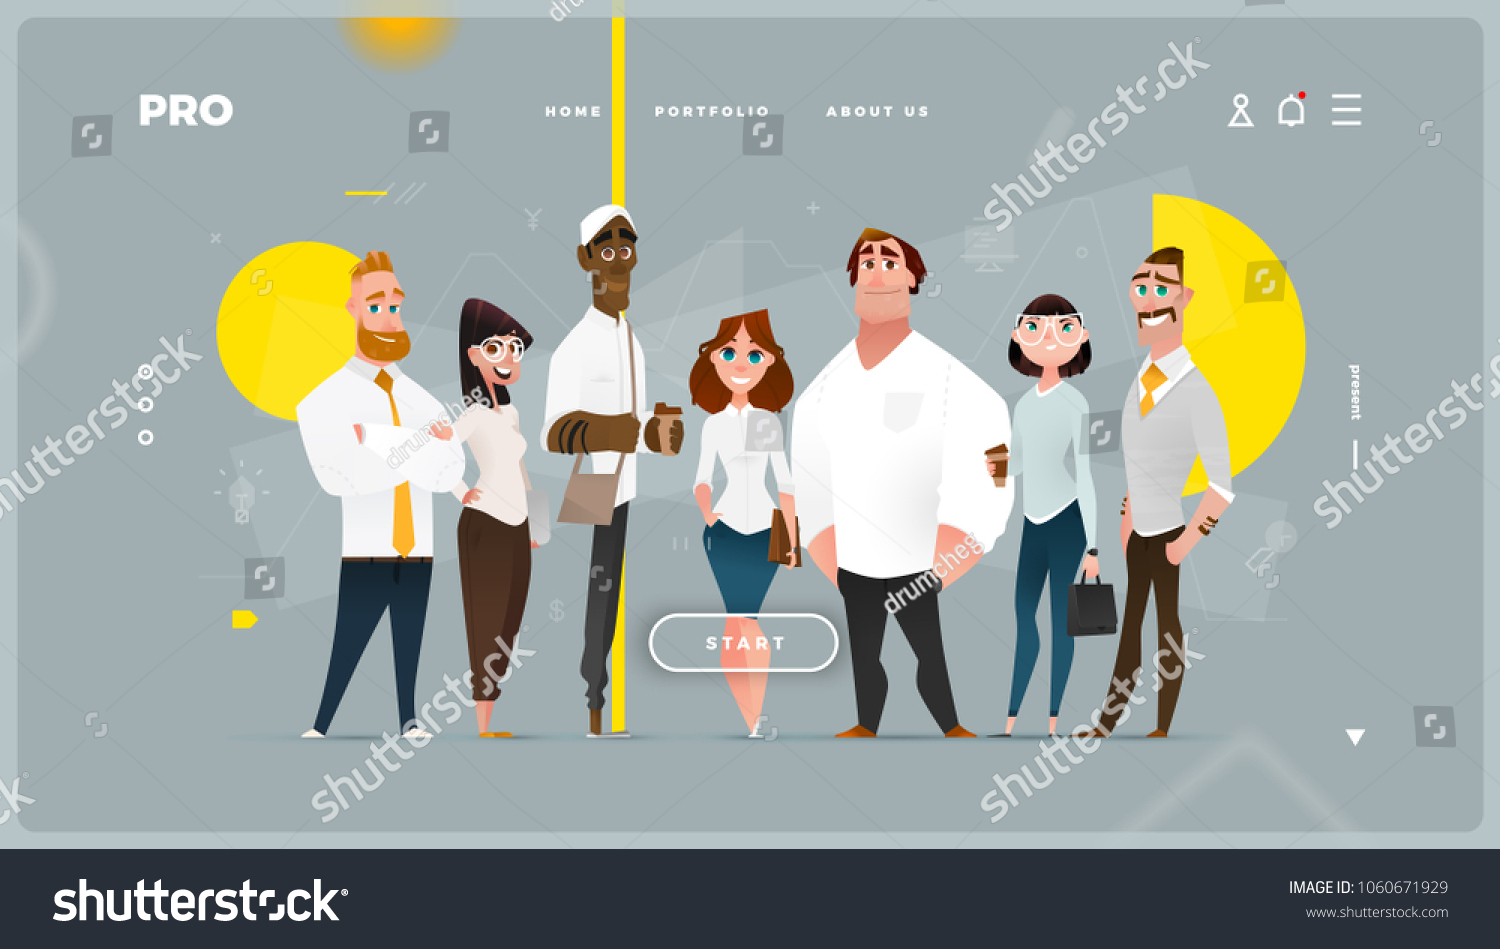 Main Page Web Design with Business Cartoon Characters in Flat Style for Your Projects #1060671929